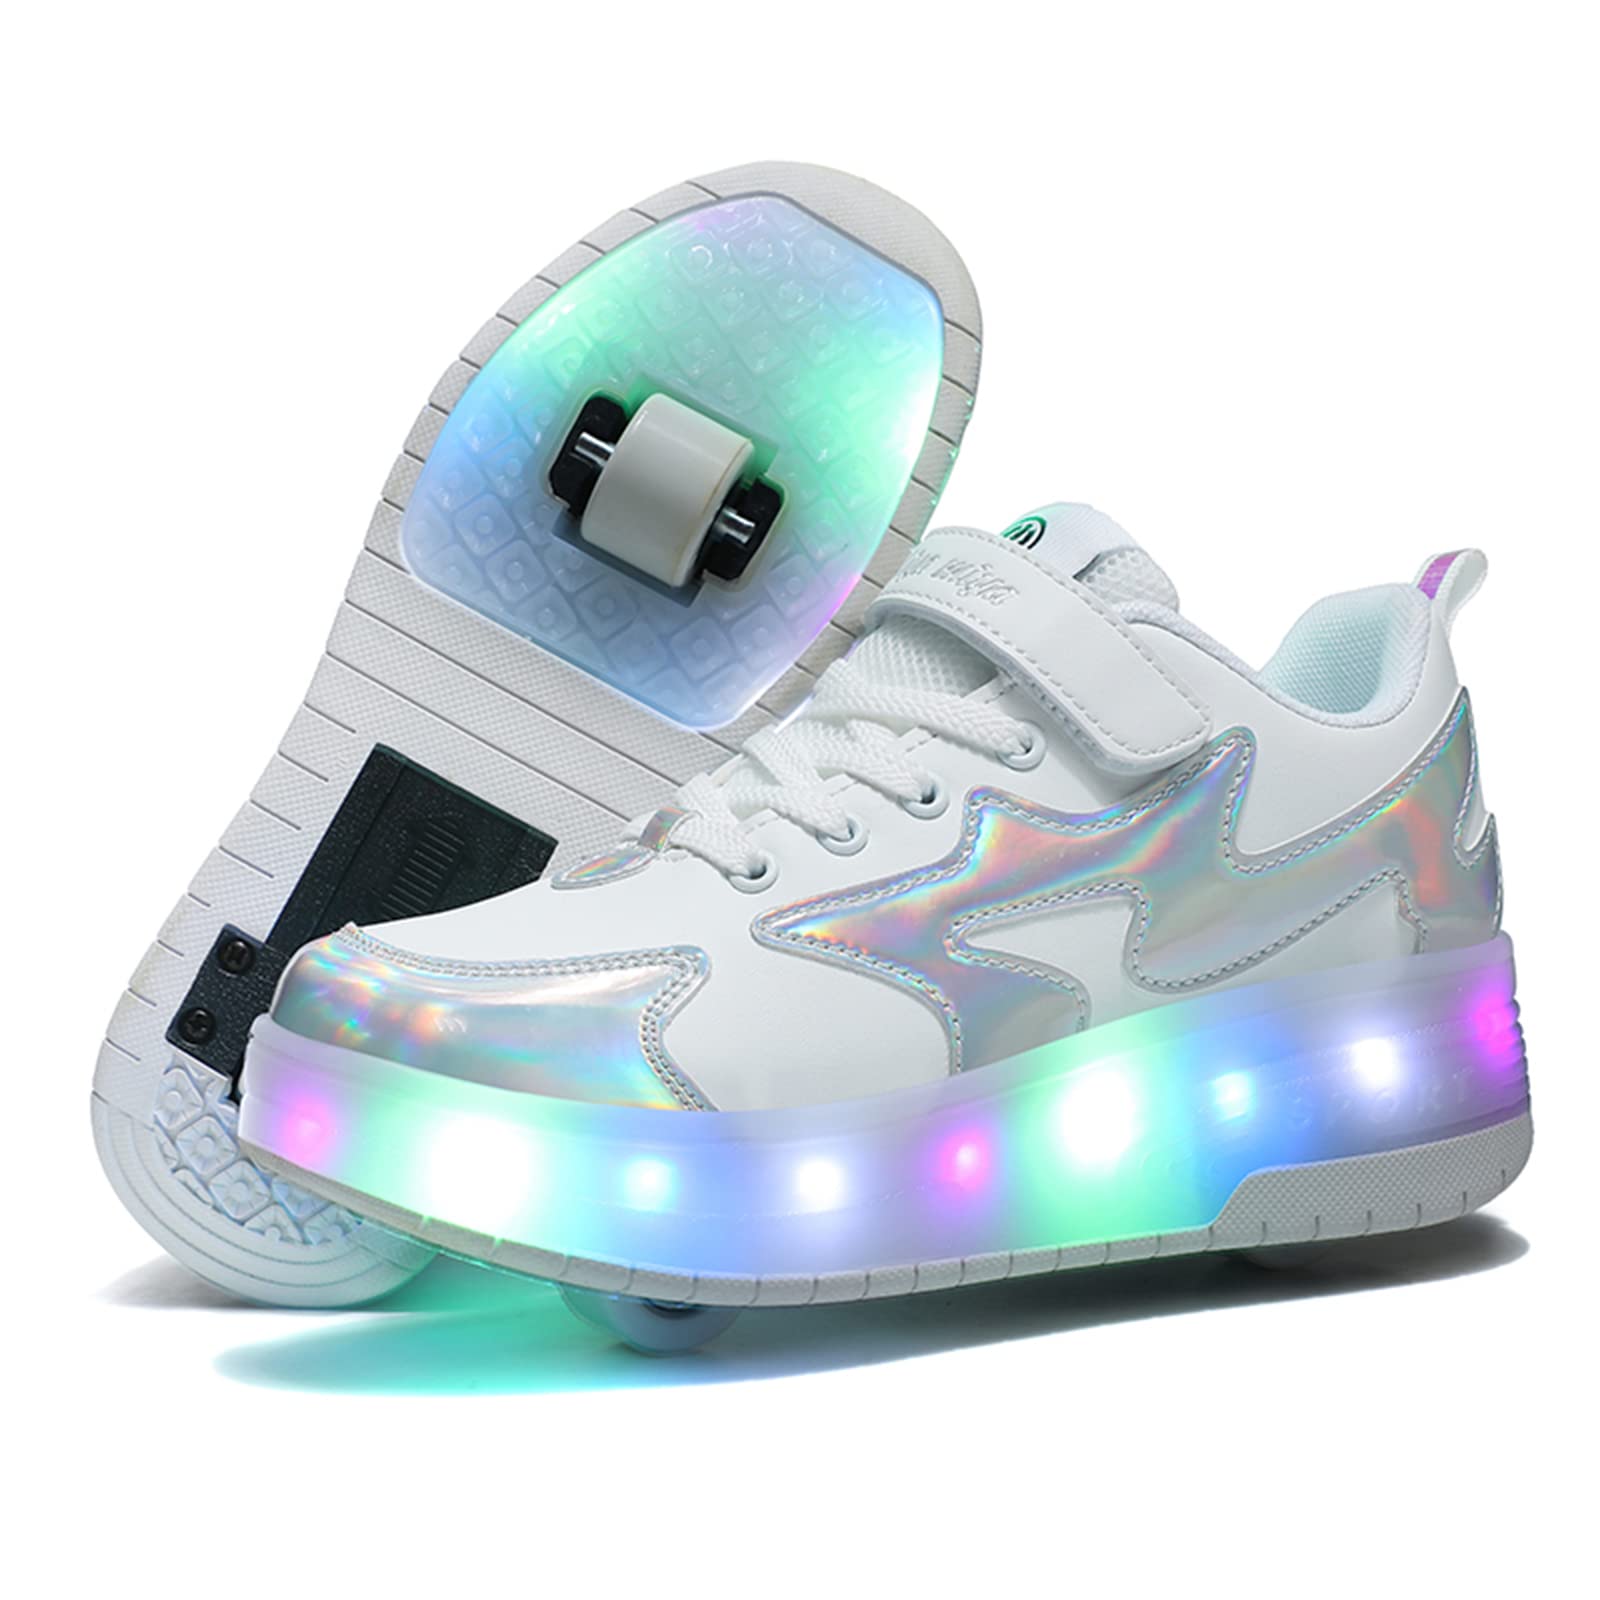 BFOEL Girls Roller Skates Light up Shoes Roller Shoes USB Charge Girls Boys Sneakers with Wheels LED Roller Skates Shoes(5.5 Big Kid White Silver 37)